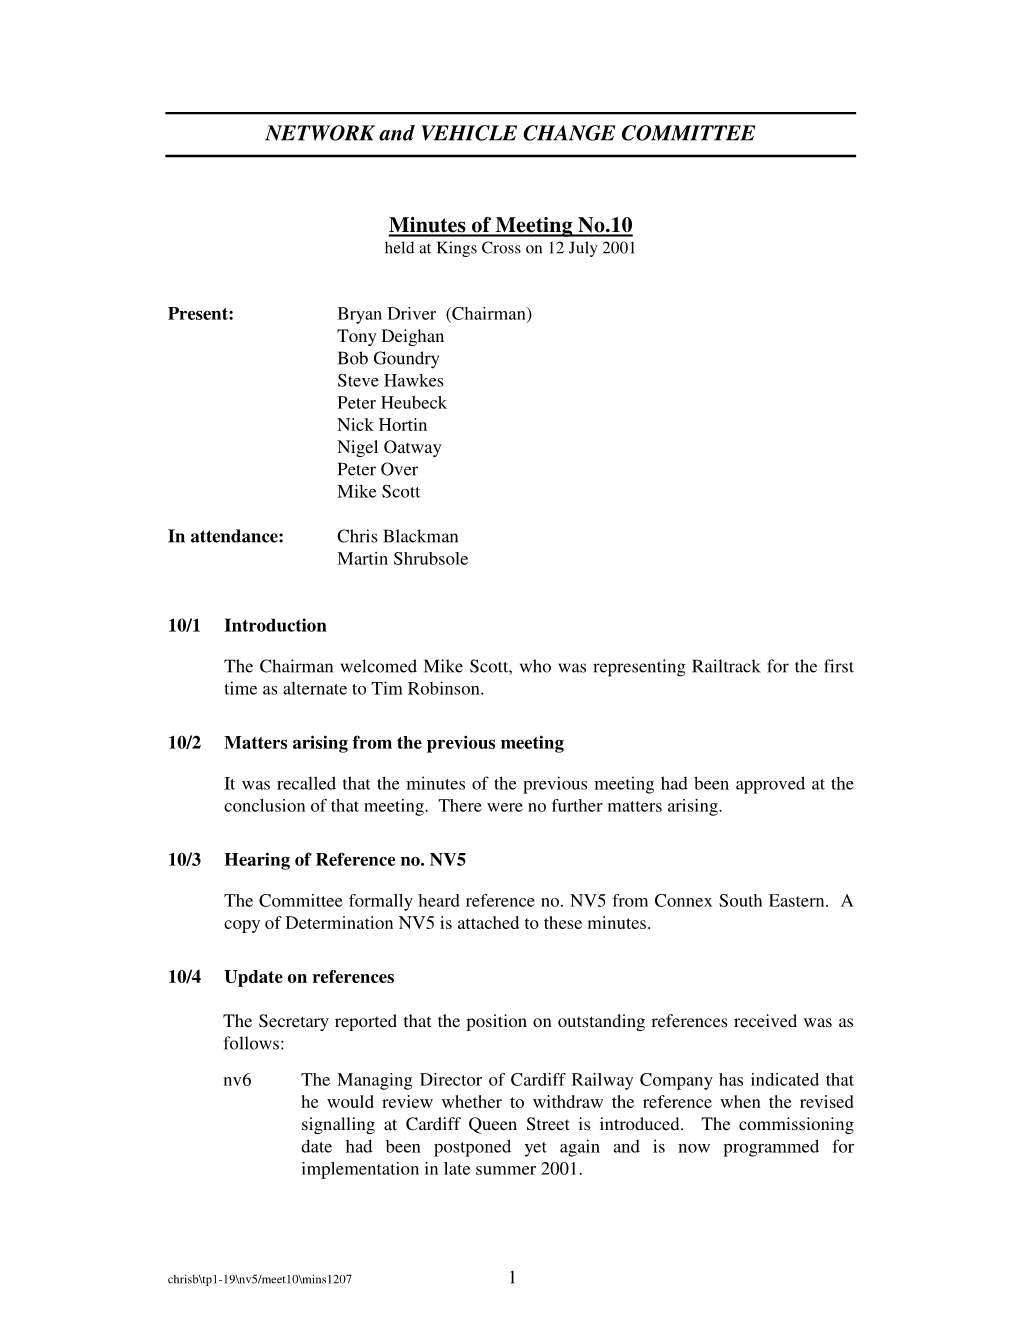 NETWORK and VEHICLE CHANGE COMMITTEE Minutes Of